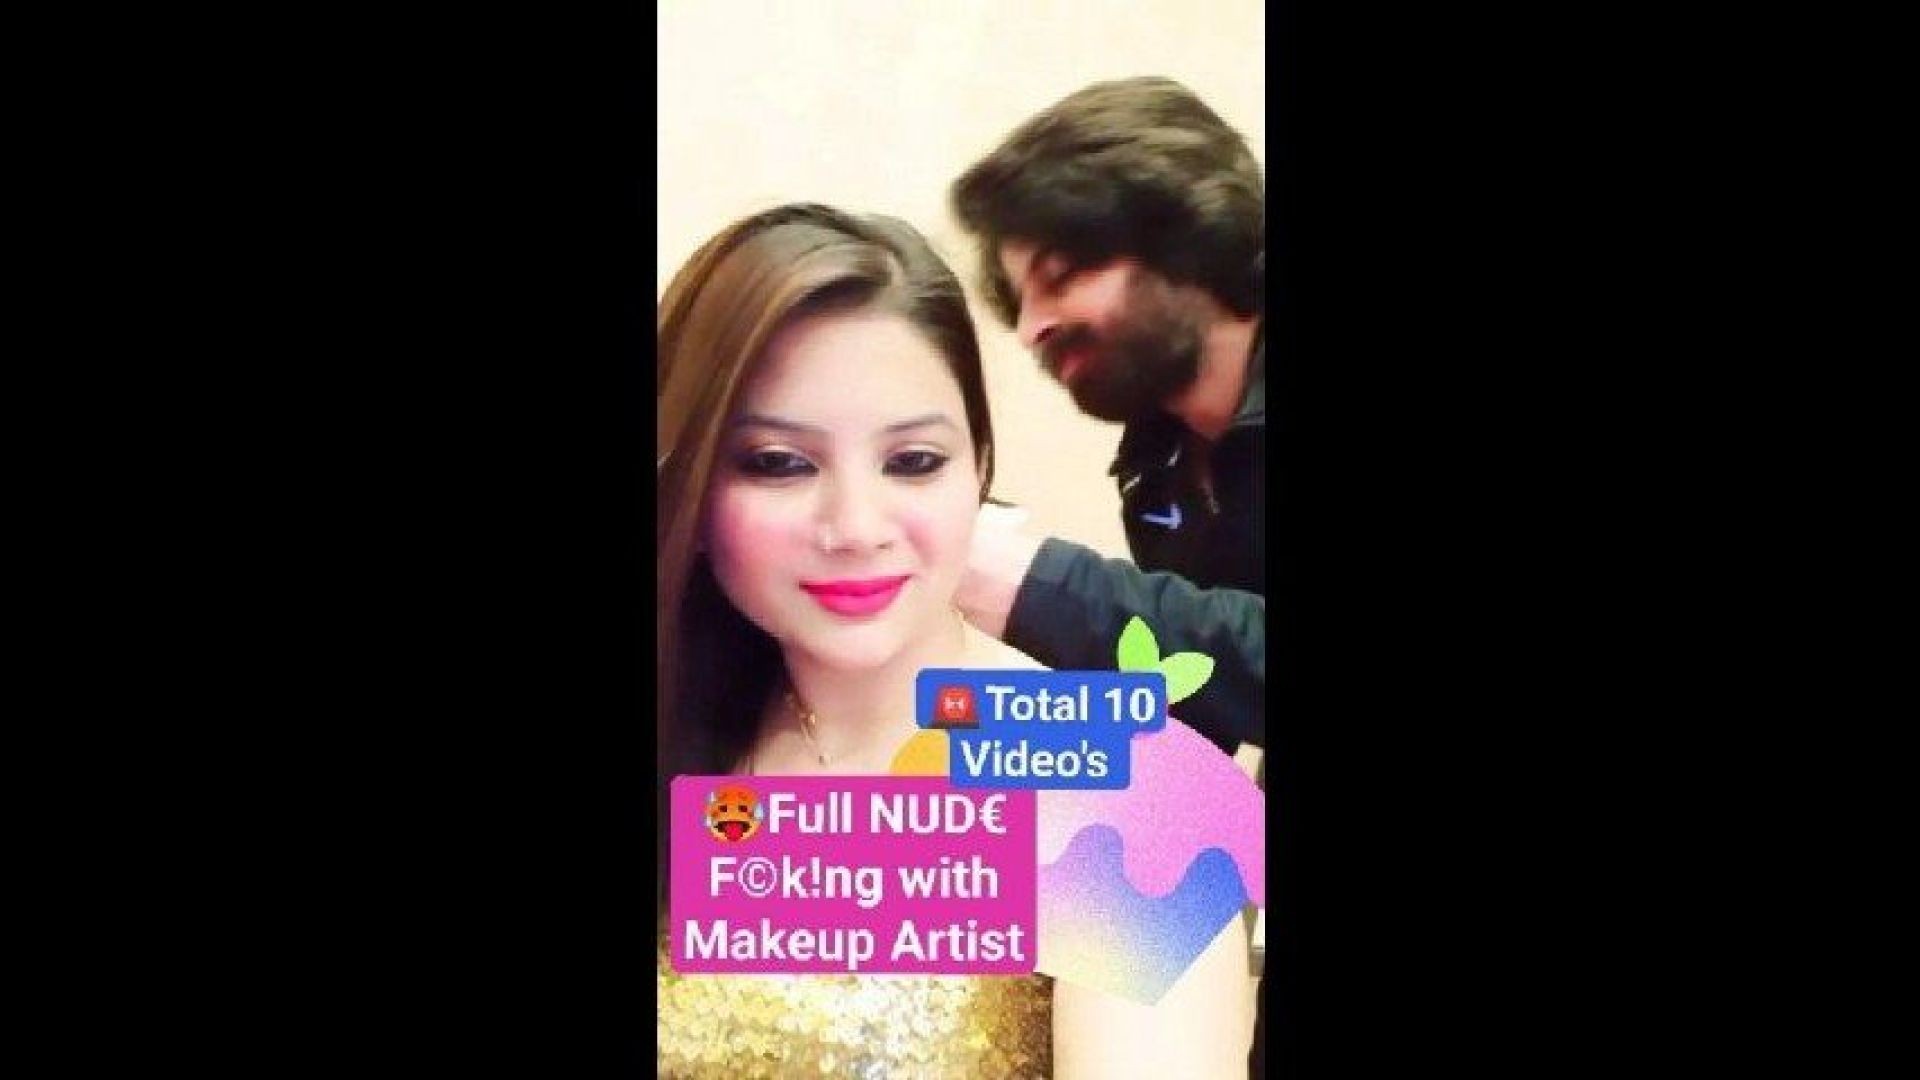 Famous Pakistani TV Star Latest Viral Stuff Ft. Full NUD€ F©k!ng with her Makeup Artist